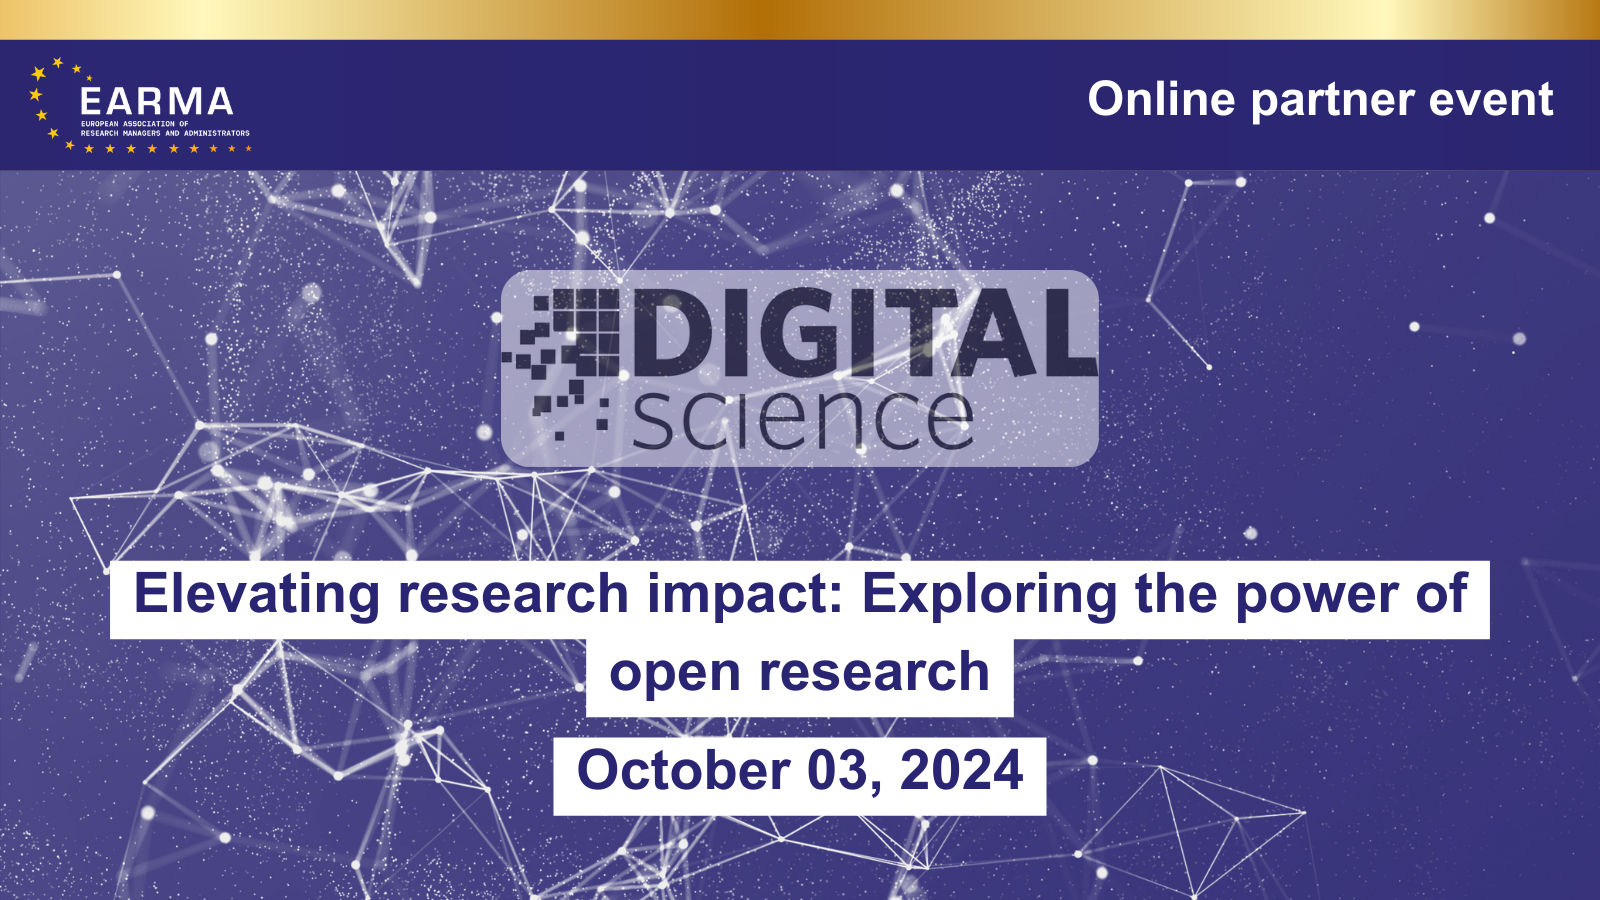 Elevating research impact: Exploring the power of open research